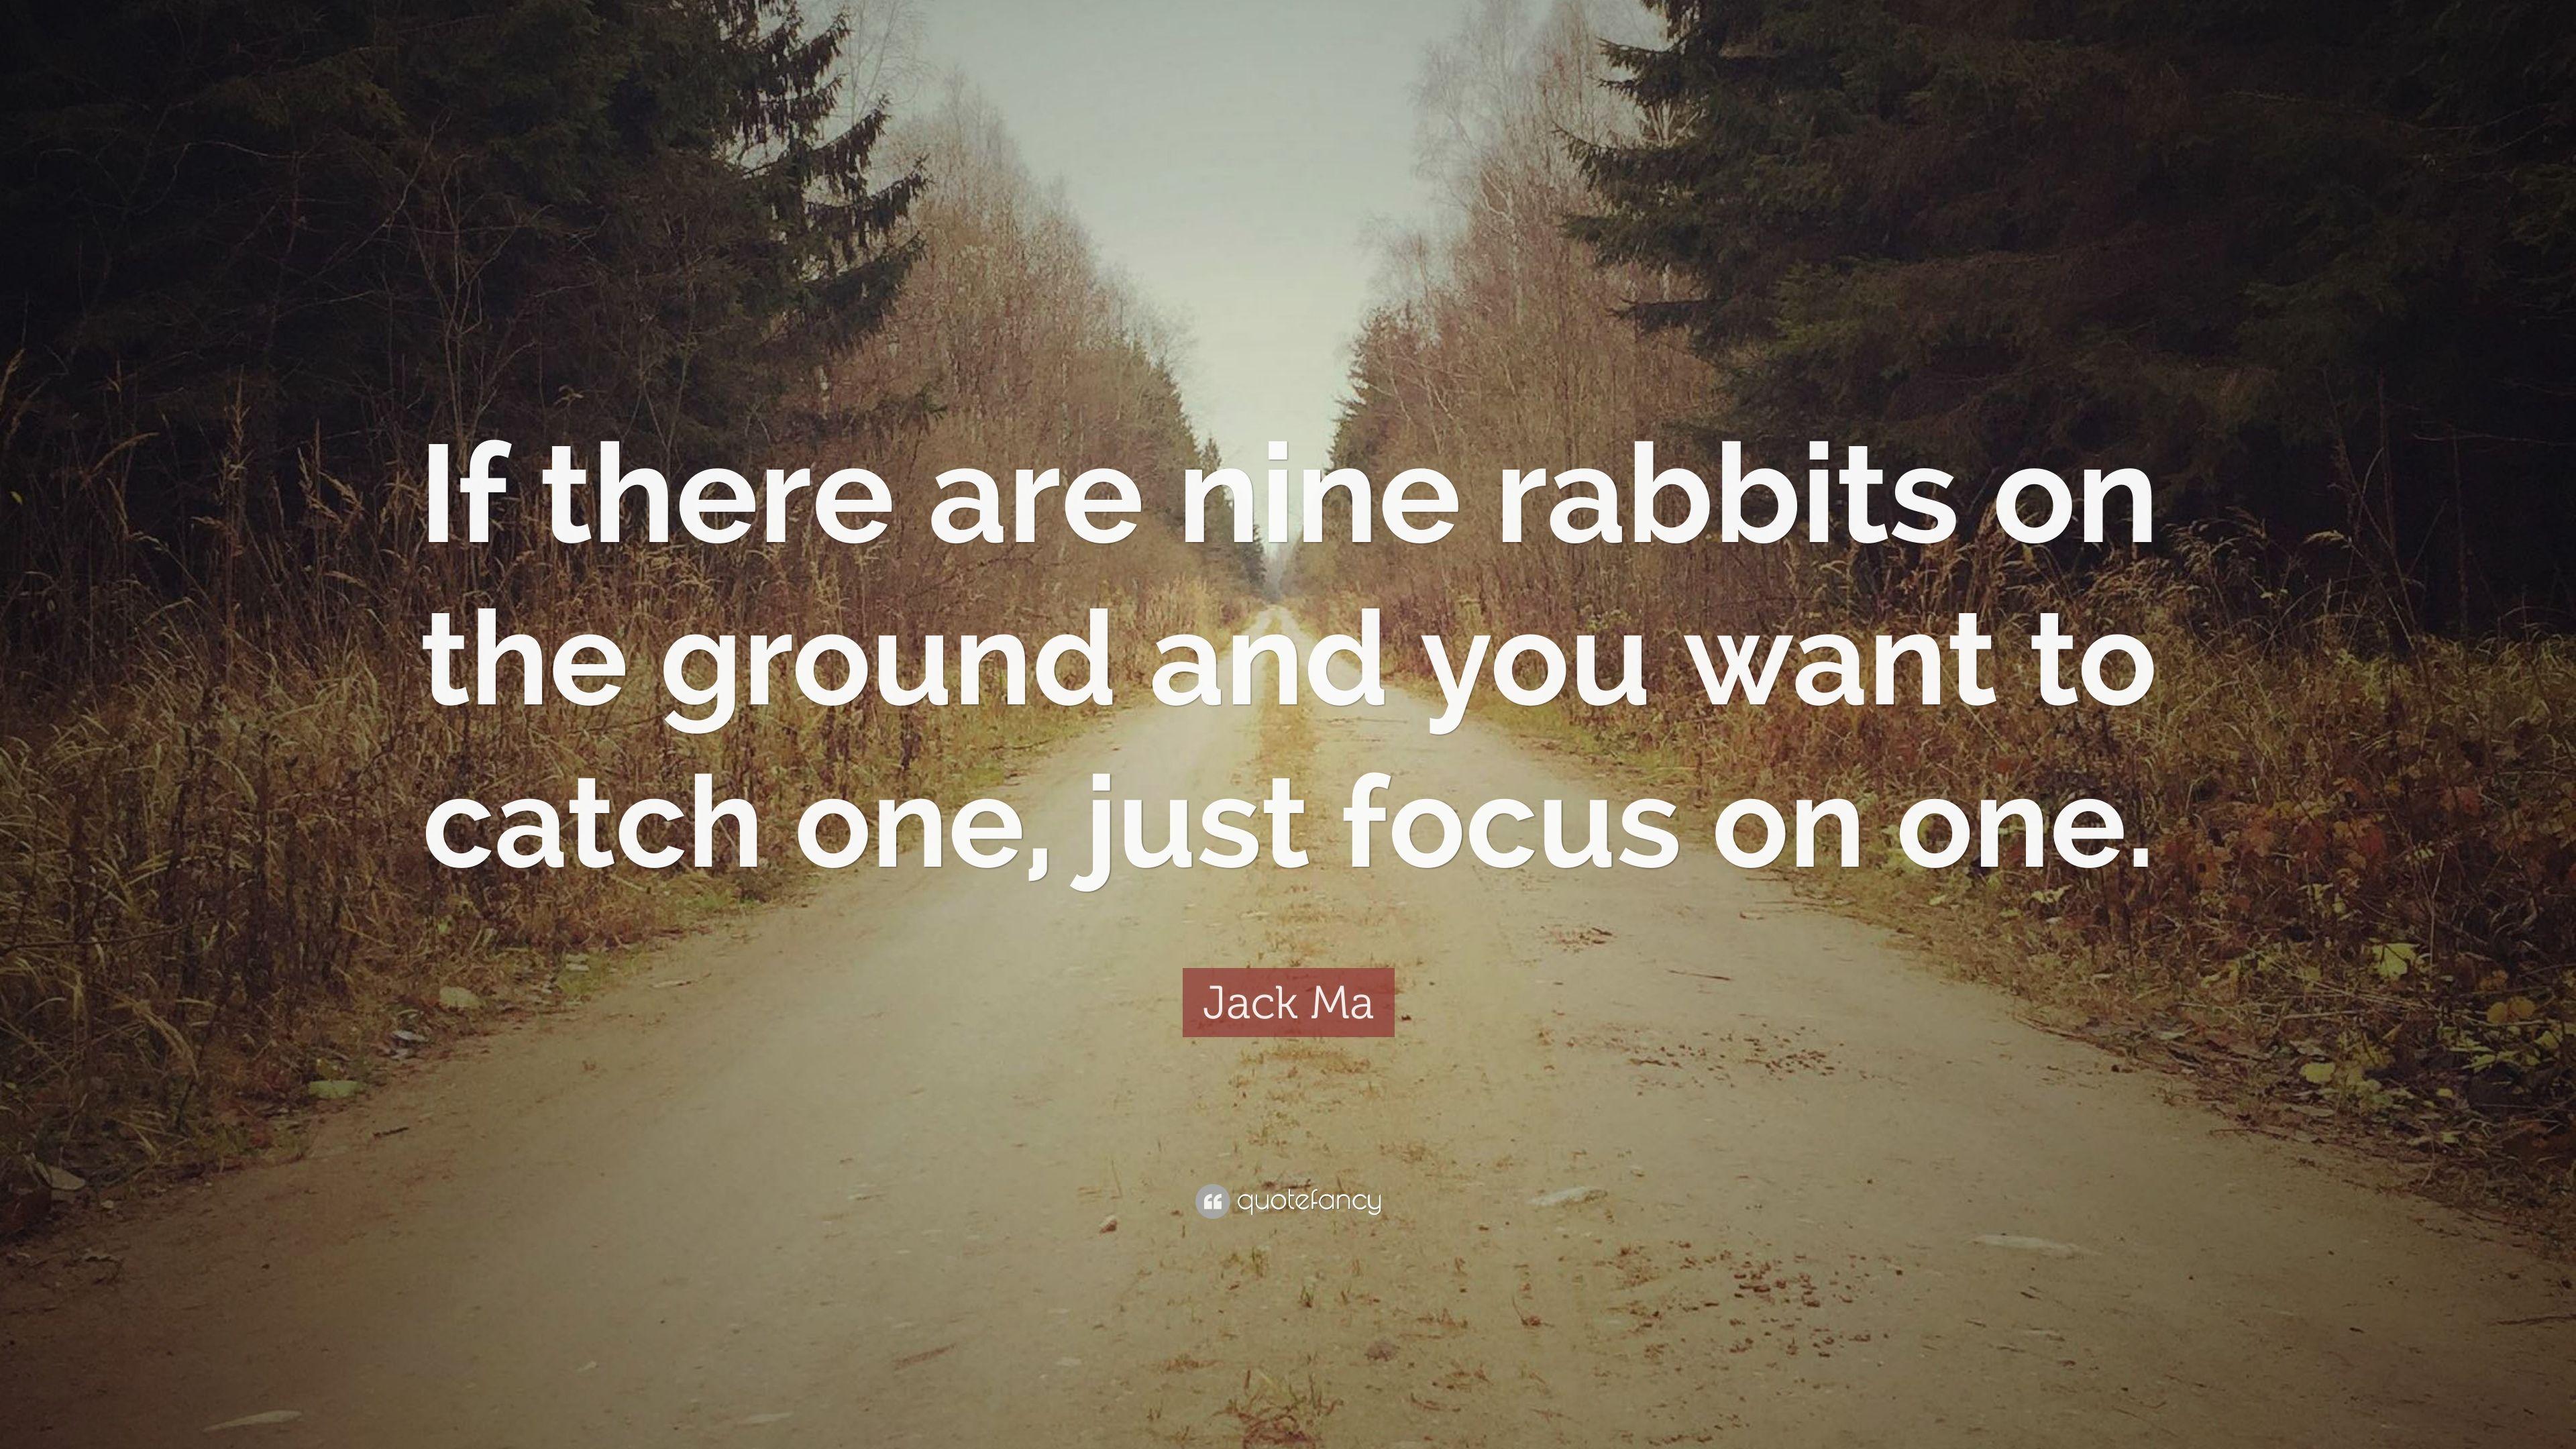 Jack Ma Quote: “If there are nine rabbits on the ground and you